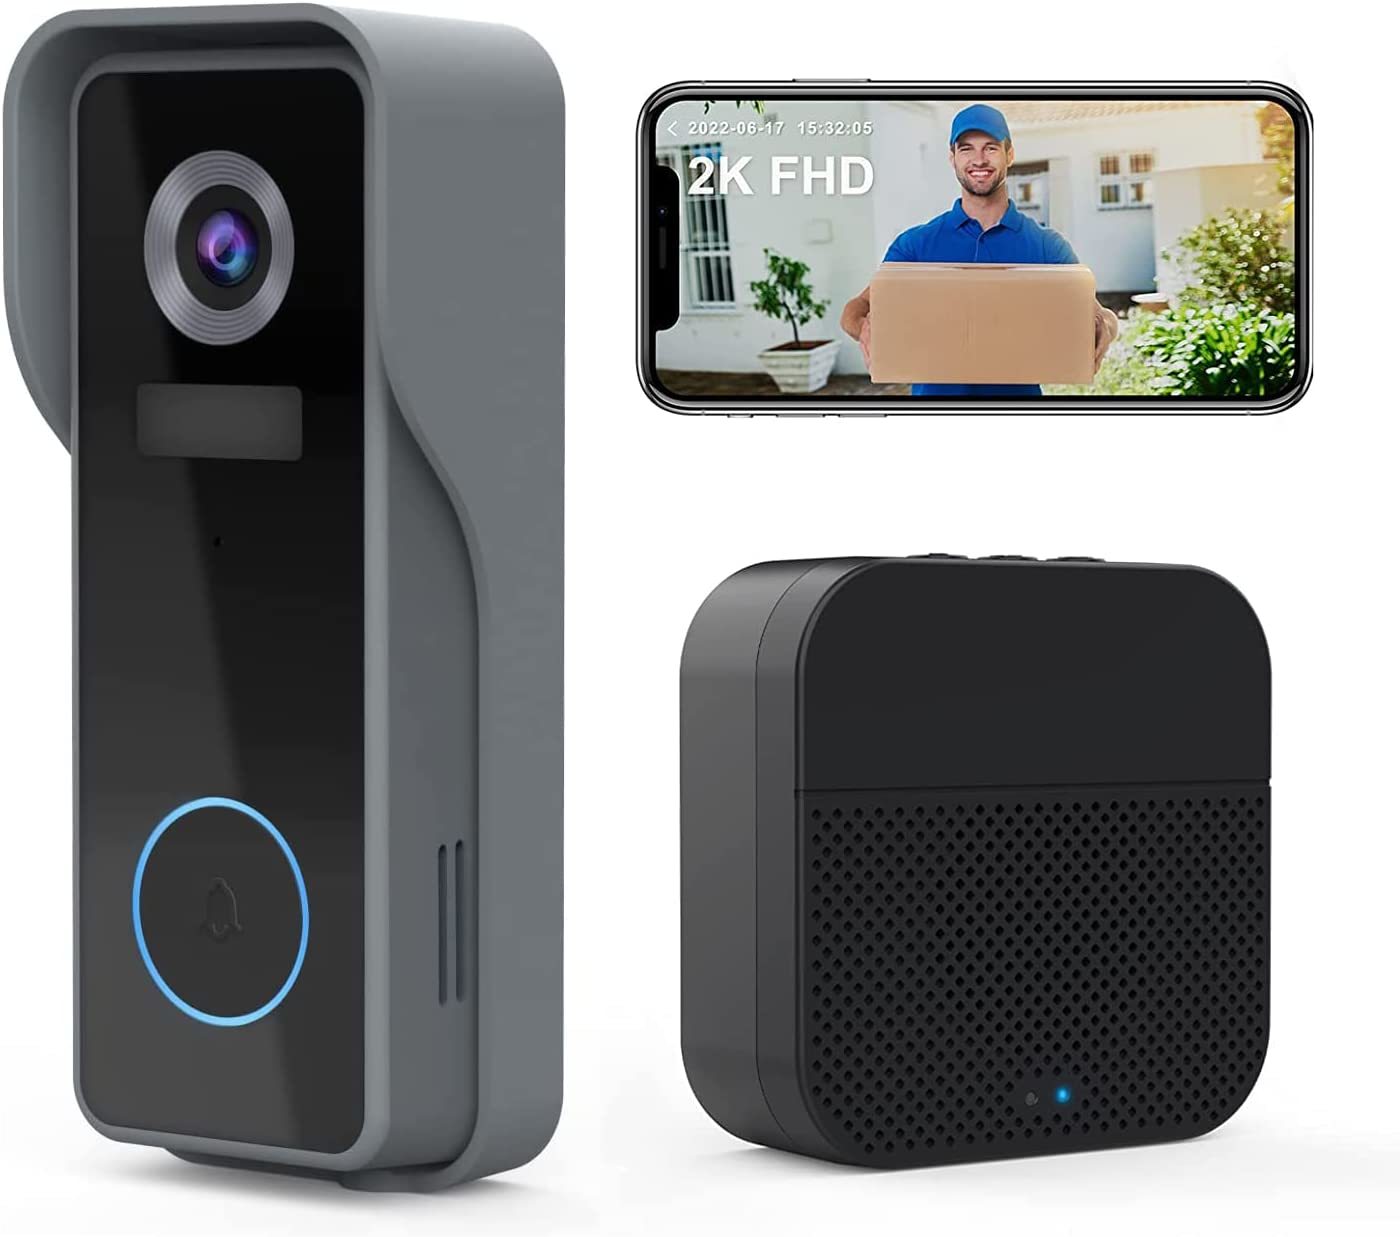 Primary image for Zumimall Doorbell Camera Wireless 2K Fhd, Video Doorbell With, Battery Powered